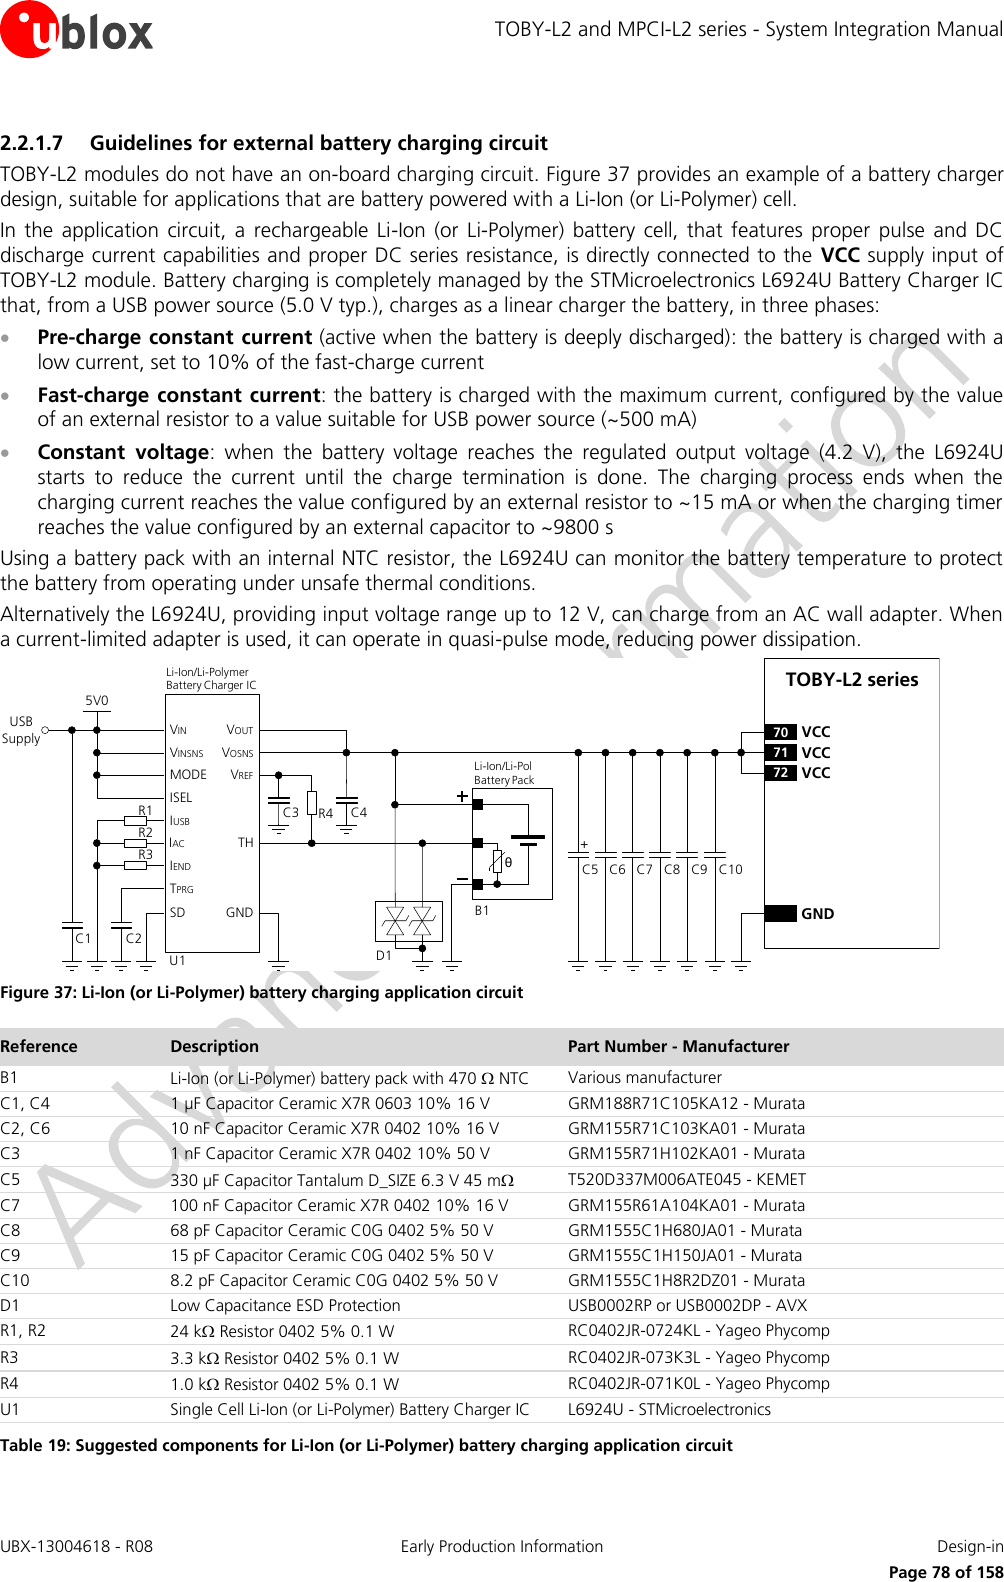 TOBY-L2 and MPCI-L2 series - System Integration Manual UBX-13004618 - R08  Early Production Information  Design-in     Page 78 of 158 2.2.1.7 Guidelines for external battery charging circuit TOBY-L2 modules do not have an on-board charging circuit. Figure 37 provides an example of a battery charger design, suitable for applications that are battery powered with a Li-Ion (or Li-Polymer) cell. In  the  application  circuit,  a  rechargeable  Li-Ion  (or  Li-Polymer)  battery  cell, that  features  proper  pulse  and  DC discharge current capabilities and proper DC series resistance, is directly connected to the  VCC supply input of TOBY-L2 module. Battery charging is completely managed by the STMicroelectronics L6924U Battery Charger IC that, from a USB power source (5.0 V typ.), charges as a linear charger the battery, in three phases:  Pre-charge constant current (active when the battery is deeply discharged): the battery is charged with a low current, set to 10% of the fast-charge current  Fast-charge constant current: the battery is charged with the maximum current, configured by the value of an external resistor to a value suitable for USB power source (~500 mA)  Constant  voltage:  when  the  battery  voltage  reaches  the  regulated  output  voltage  (4.2  V),  the  L6924U starts  to  reduce  the  current  until  the  charge  termination  is  done.  The  charging  process  ends  when  the charging current reaches the value configured by an external resistor to ~15 mA or when the charging timer reaches the value configured by an external capacitor to ~9800 s Using a battery pack with an internal NTC resistor, the L6924U can monitor the battery temperature to protect the battery from operating under unsafe thermal conditions. Alternatively the L6924U, providing input voltage range up to 12 V, can charge from an AC wall adapter. When a current-limited adapter is used, it can operate in quasi-pulse mode, reducing power dissipation. C5 C8C7C6 C9GNDTOBY-L2 series71 VCC72 VCC70 VCC+USB SupplyC3 R4θU1IUSBIACIENDTPRGSDVINVINSNSMODEISELC2C15V0THGNDVOUTVOSNSVREFR1R2R3Li-Ion/Li-Pol Battery PackD1B1C4Li-Ion/Li-Polymer    Battery Charger ICC10 Figure 37: Li-Ion (or Li-Polymer) battery charging application circuit Reference Description Part Number - Manufacturer B1 Li-Ion (or Li-Polymer) battery pack with 470  NTC Various manufacturer C1, C4 1 µF Capacitor Ceramic X7R 0603 10% 16 V GRM188R71C105KA12 - Murata C2, C6 10 nF Capacitor Ceramic X7R 0402 10% 16 V GRM155R71C103KA01 - Murata C3 1 nF Capacitor Ceramic X7R 0402 10% 50 V GRM155R71H102KA01 - Murata C5 330 µF Capacitor Tantalum D_SIZE 6.3 V 45 m T520D337M006ATE045 - KEMET C7 100 nF Capacitor Ceramic X7R 0402 10% 16 V GRM155R61A104KA01 - Murata C8 68 pF Capacitor Ceramic C0G 0402 5% 50 V GRM1555C1H680JA01 - Murata C9 15 pF Capacitor Ceramic C0G 0402 5% 50 V GRM1555C1H150JA01 - Murata C10 8.2 pF Capacitor Ceramic C0G 0402 5% 50 V GRM1555C1H8R2DZ01 - Murata D1 Low Capacitance ESD Protection USB0002RP or USB0002DP - AVX R1, R2 24 k Resistor 0402 5% 0.1 W RC0402JR-0724KL - Yageo Phycomp R3 3.3 k Resistor 0402 5% 0.1 W RC0402JR-073K3L - Yageo Phycomp R4 1.0 k Resistor 0402 5% 0.1 W RC0402JR-071K0L - Yageo Phycomp U1 Single Cell Li-Ion (or Li-Polymer) Battery Charger IC  L6924U - STMicroelectronics Table 19: Suggested components for Li-Ion (or Li-Polymer) battery charging application circuit  